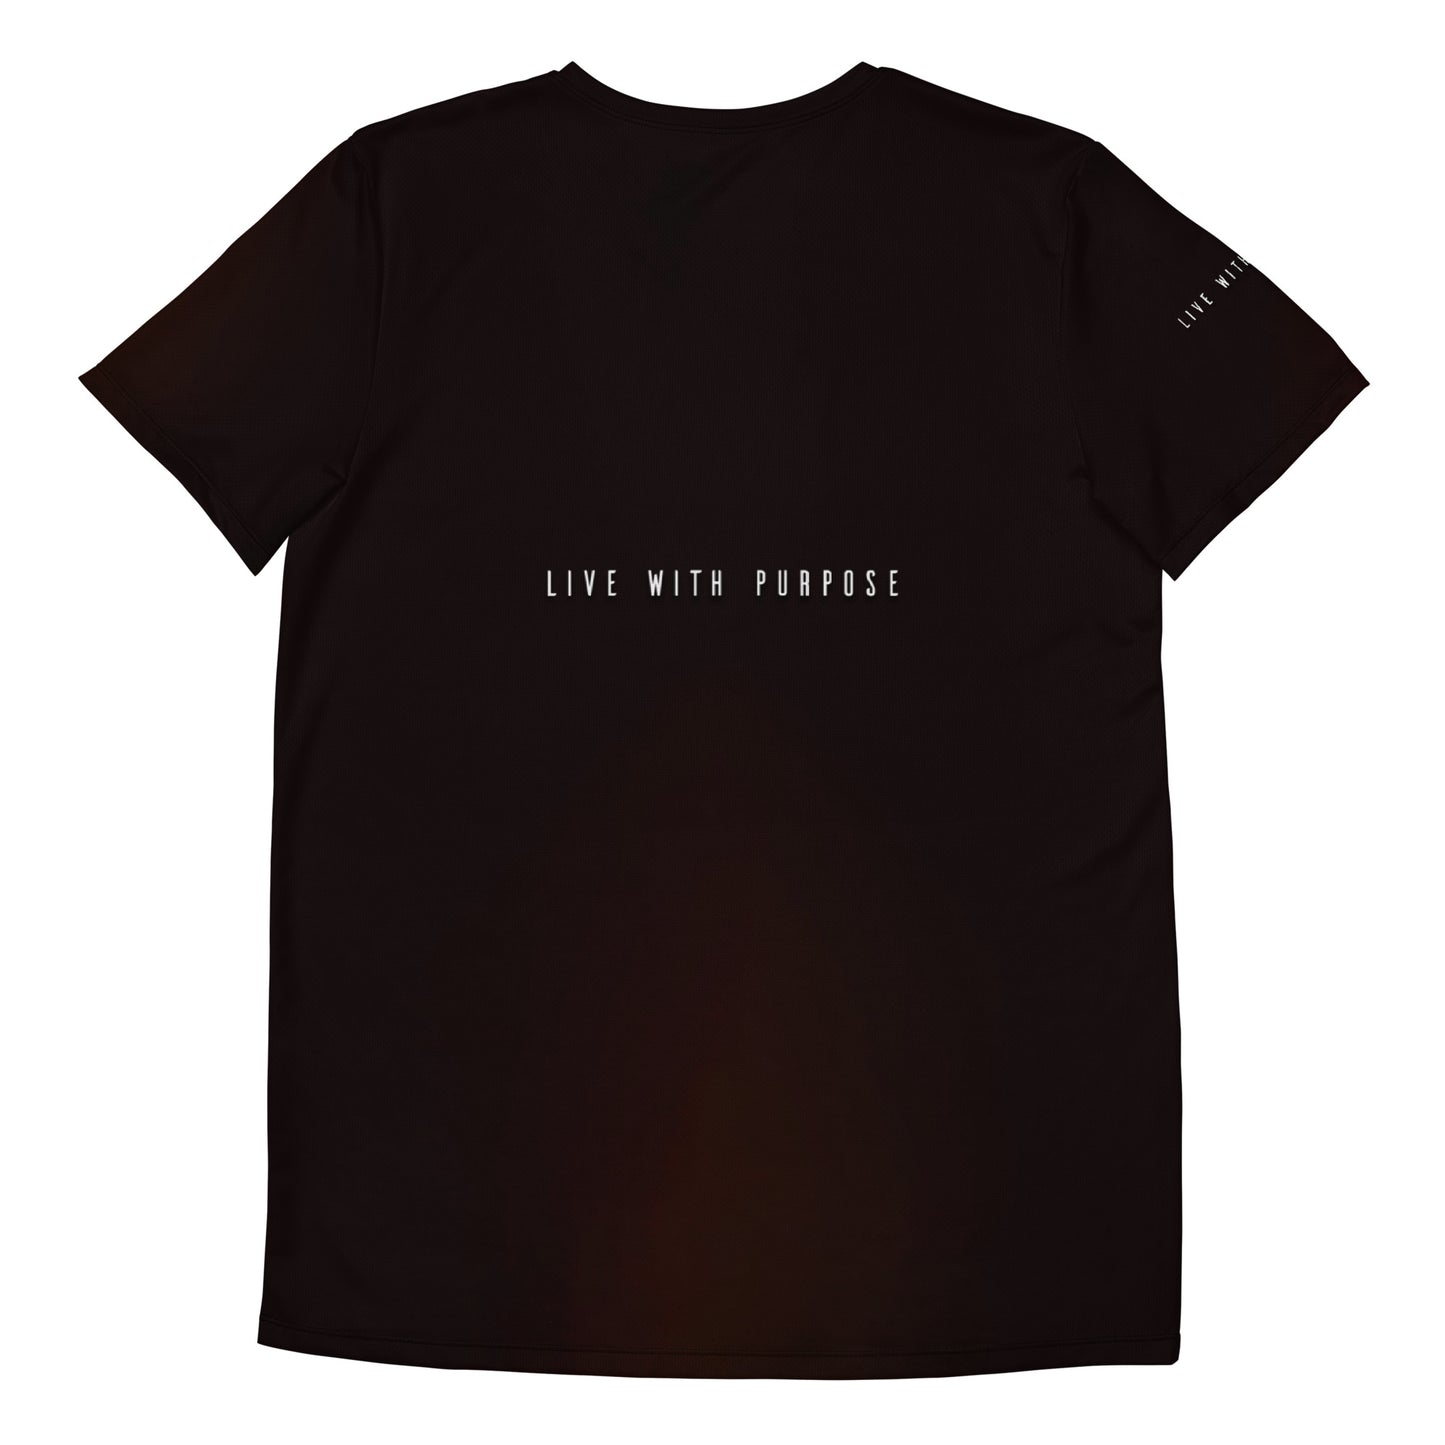 Live with Purpose - Men's Athletic T-shirt